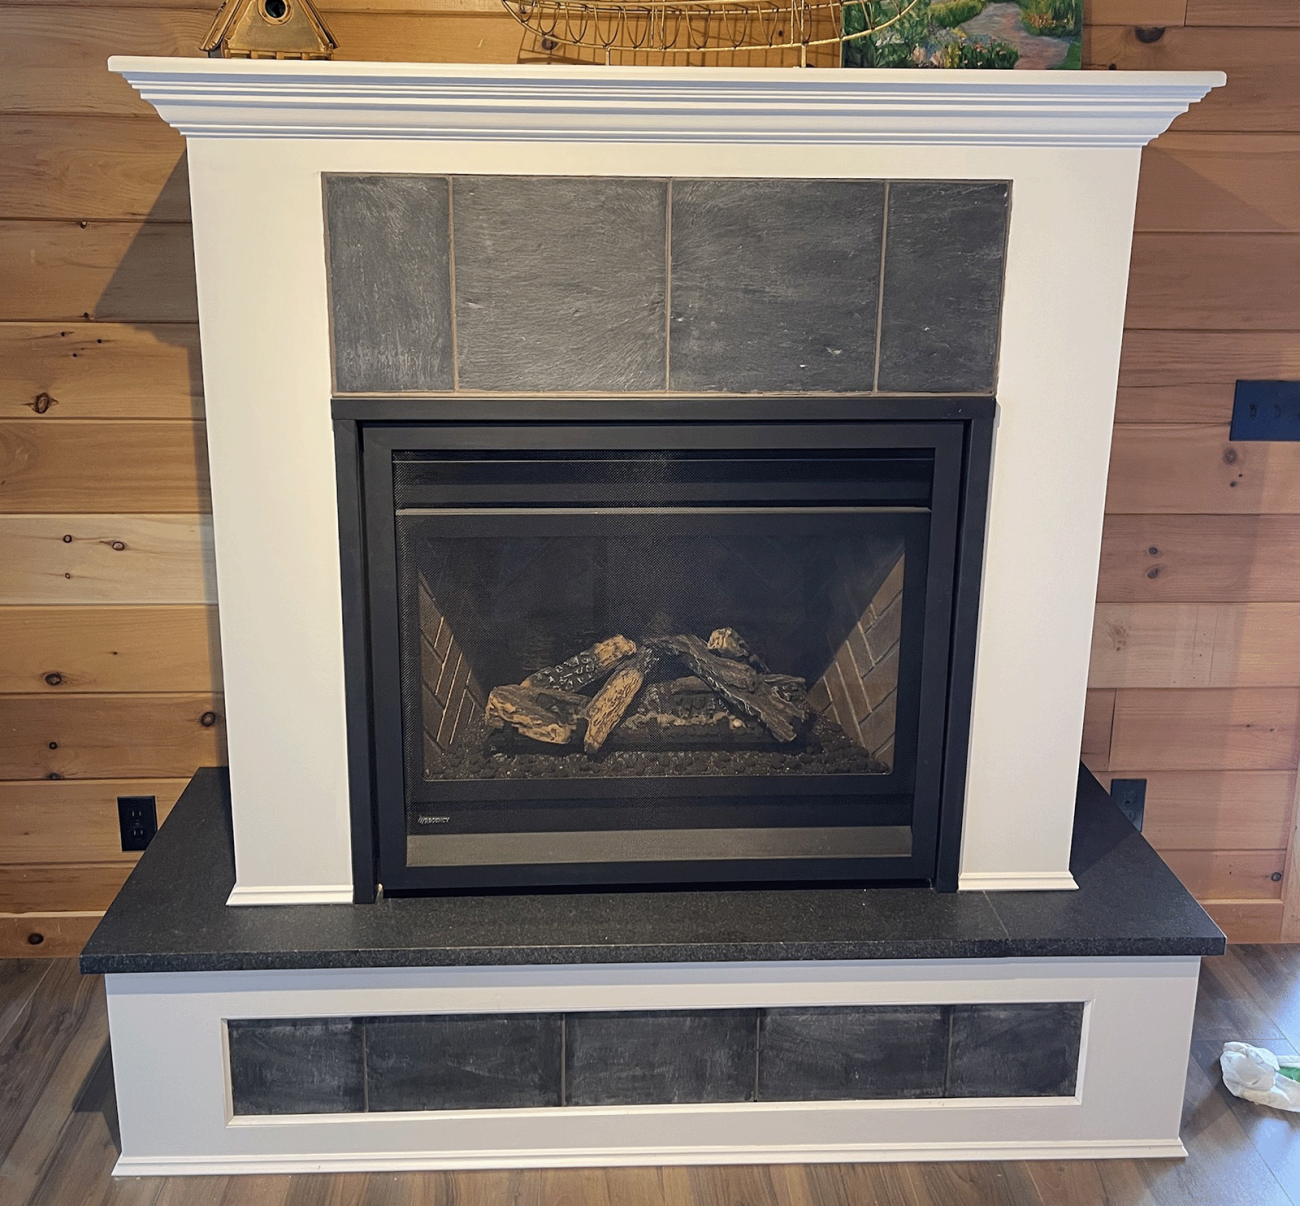 Custom designed and built fireplace surround with hearth and mantelpiece complete with slate insets.